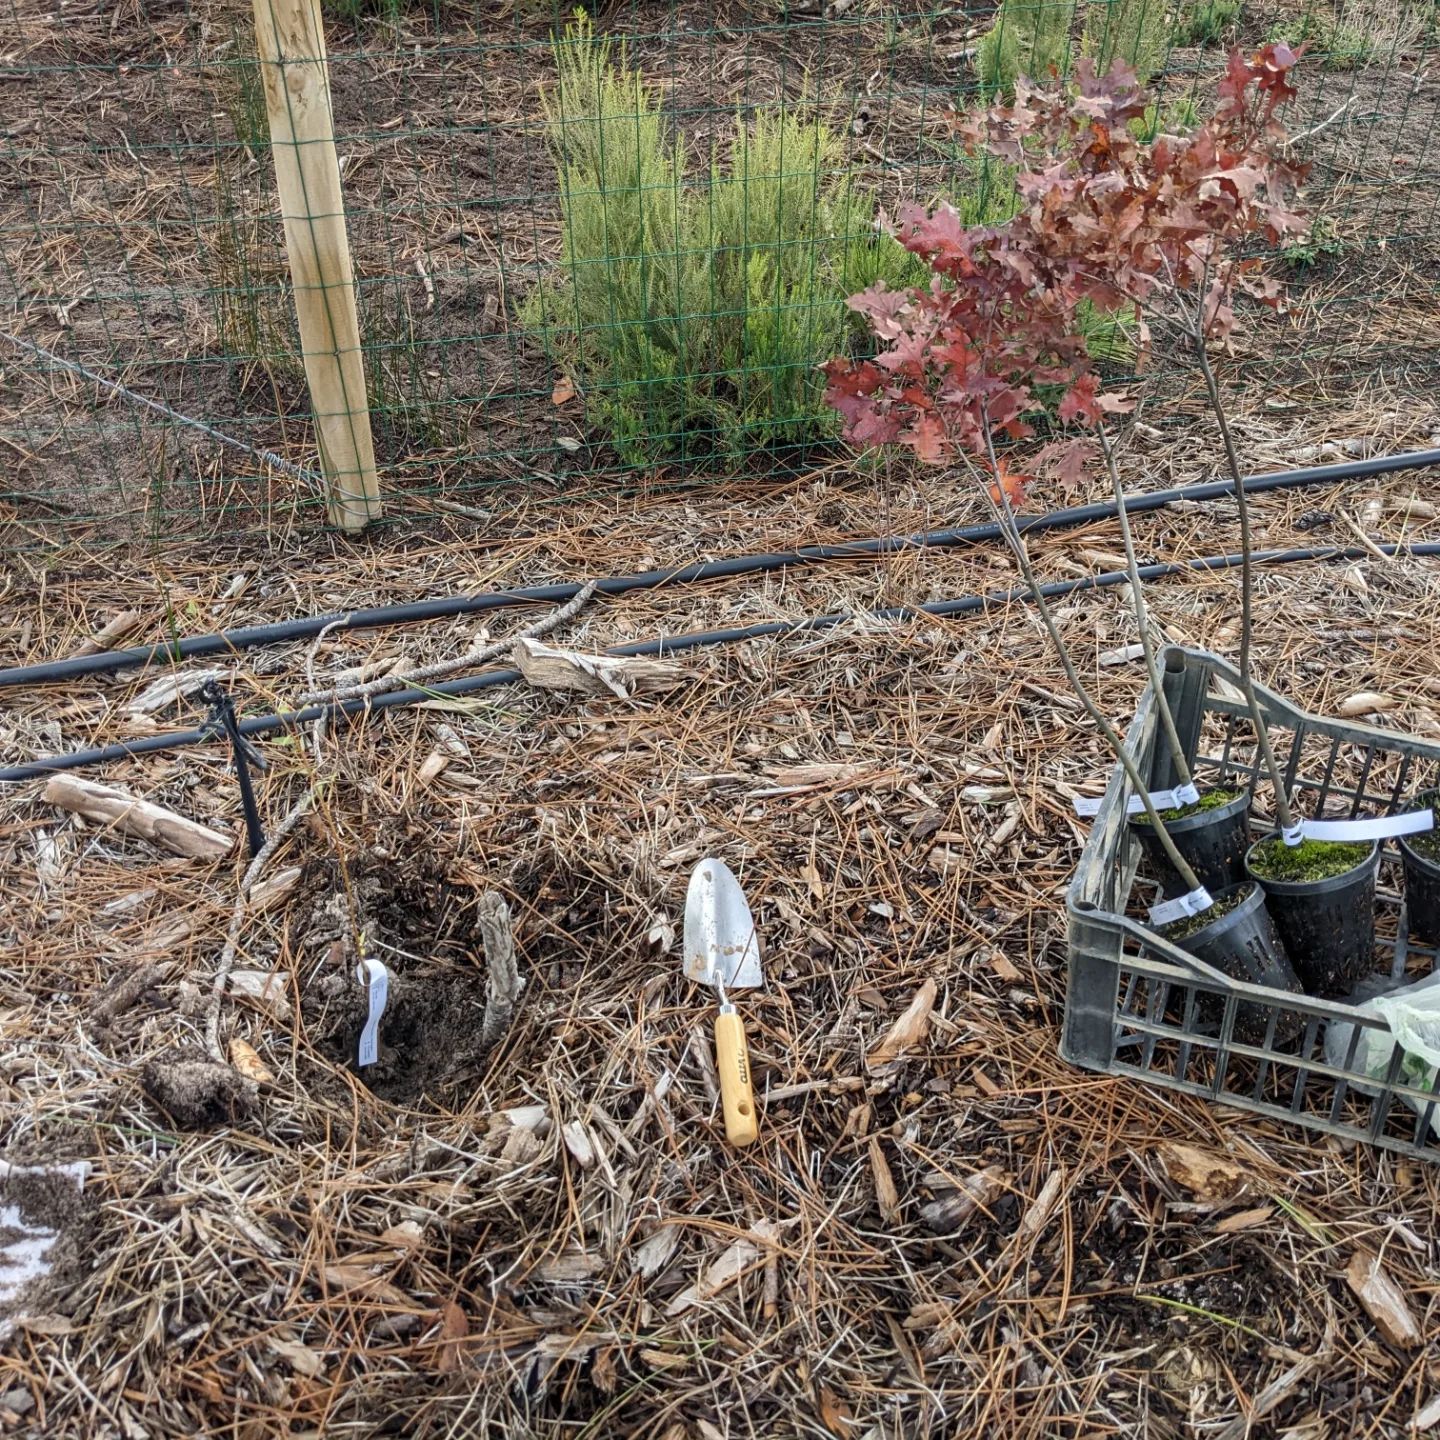 Planting replacements for last year's plantings that didn't make it: willows, oaks, buckthorns, etc